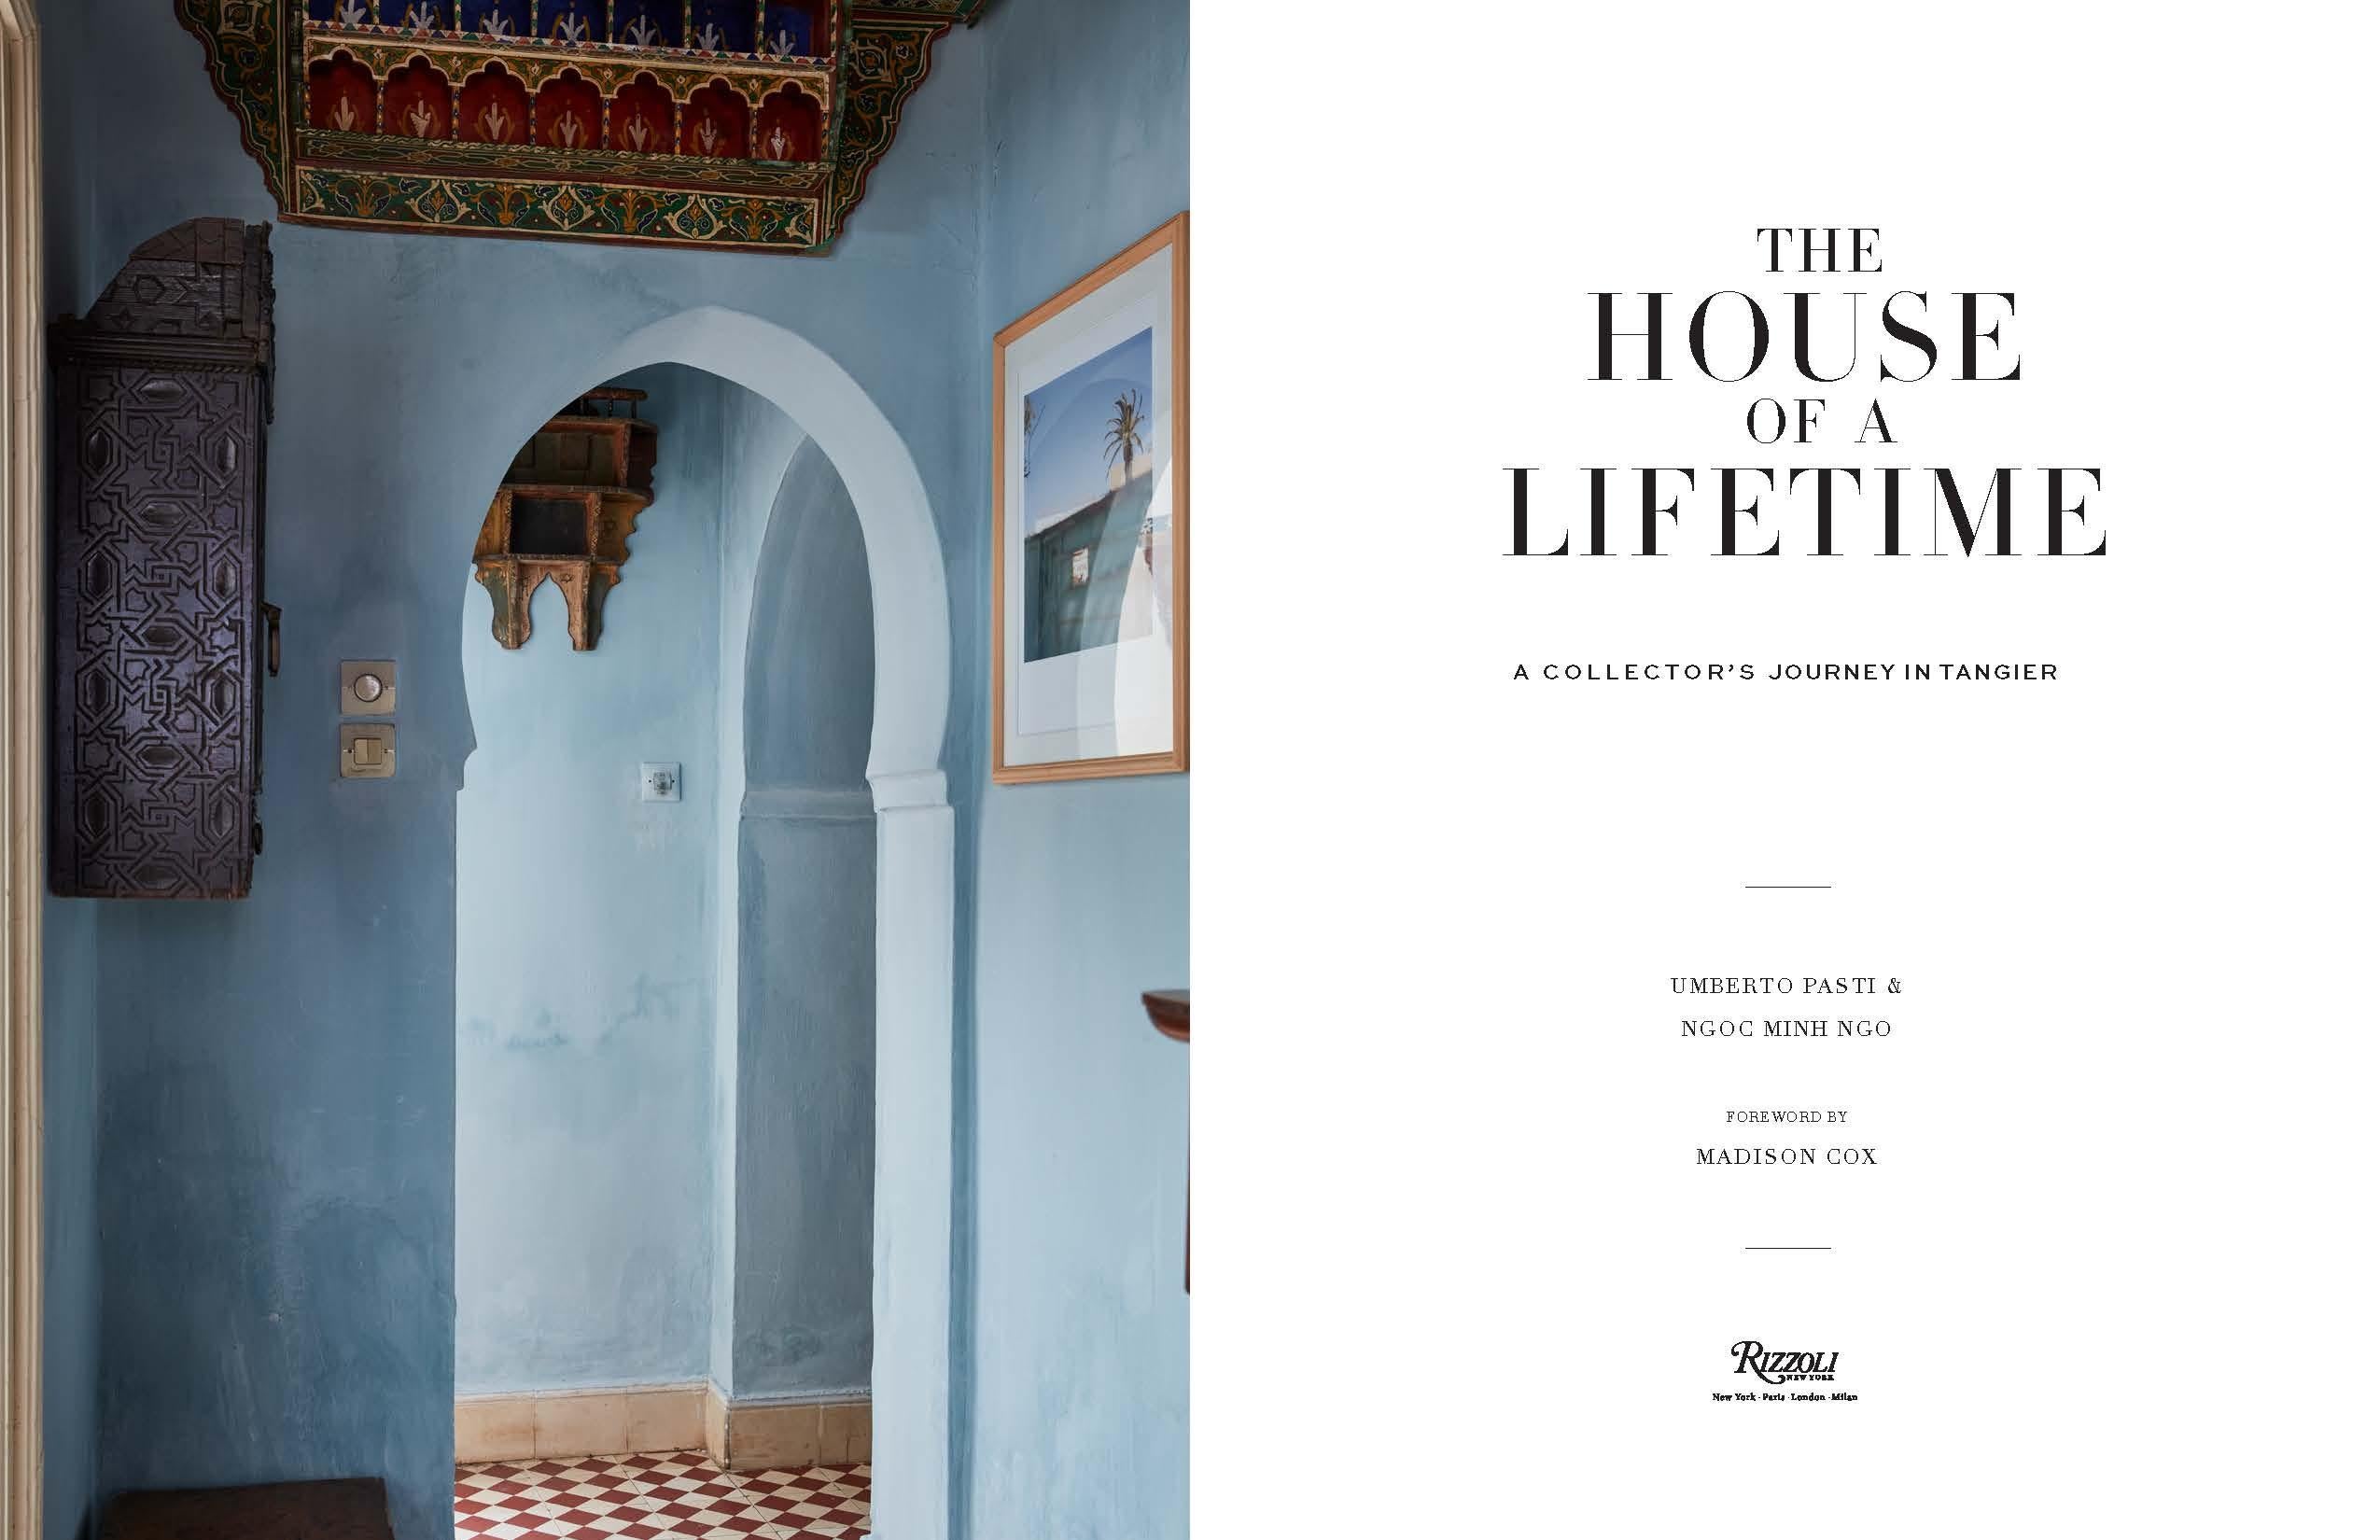 Author Umberto Pasti and Ngoc Minh Ngo, Foreword by Madison COX

A photographic tour of an exceptional villa in Tangier with a special focus of its museum-worthy collections of Morrocan artworks and objects.

Saturated colors, intricate